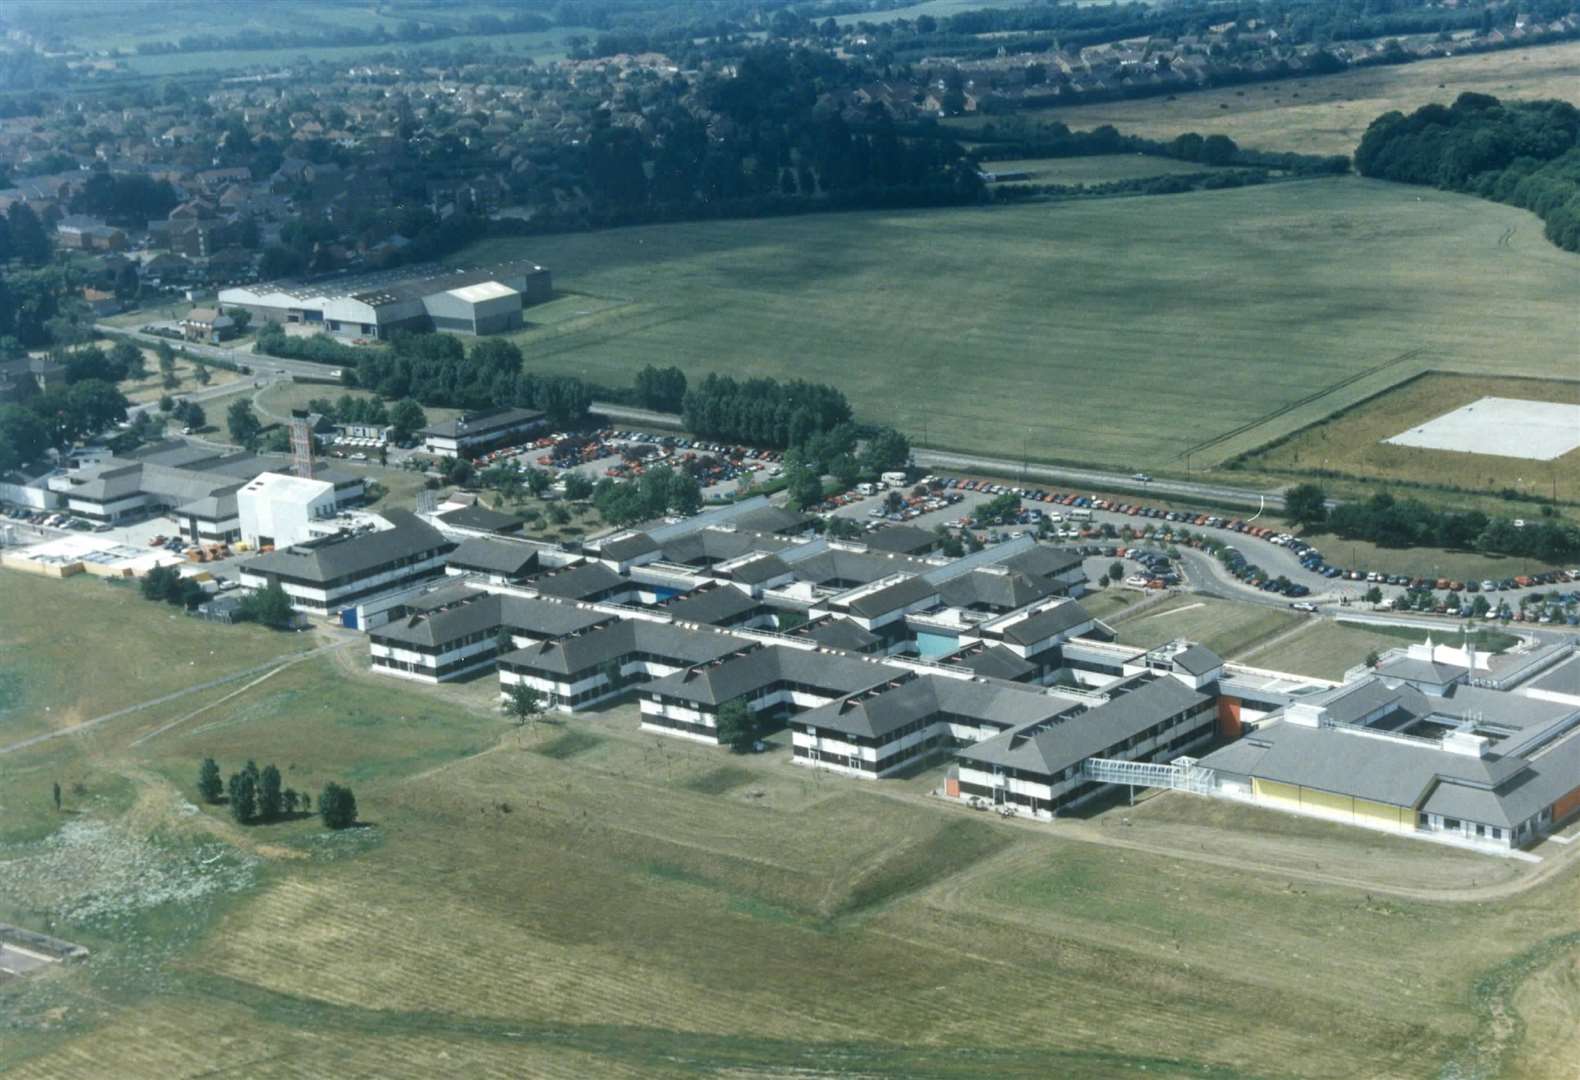 Maidstone Hospital, pictured in 1996. The site has since been extensively added to